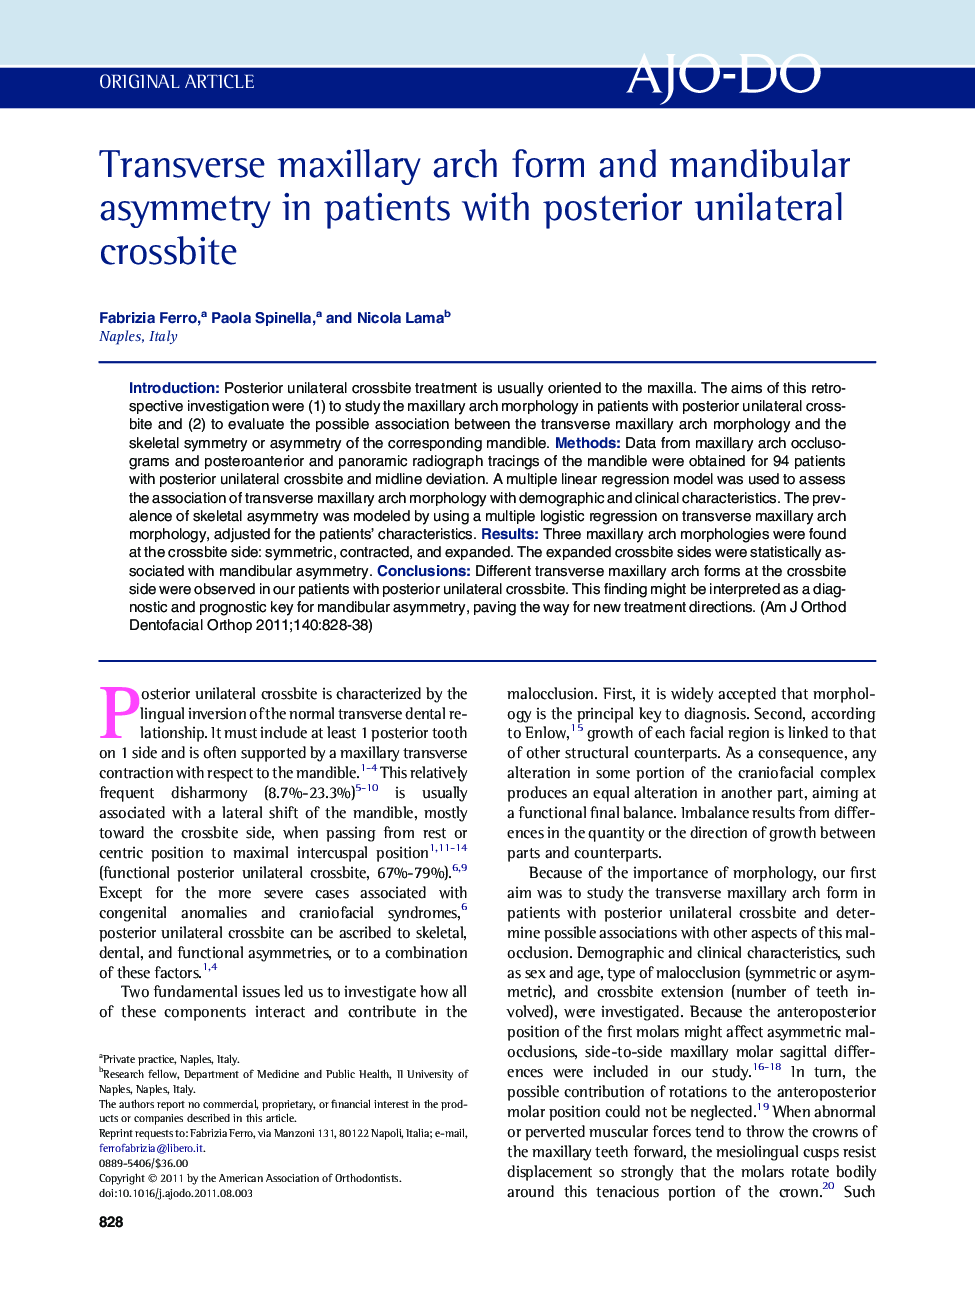 Transverse maxillary arch form and mandibular asymmetry in patients with posterior unilateral crossbite 